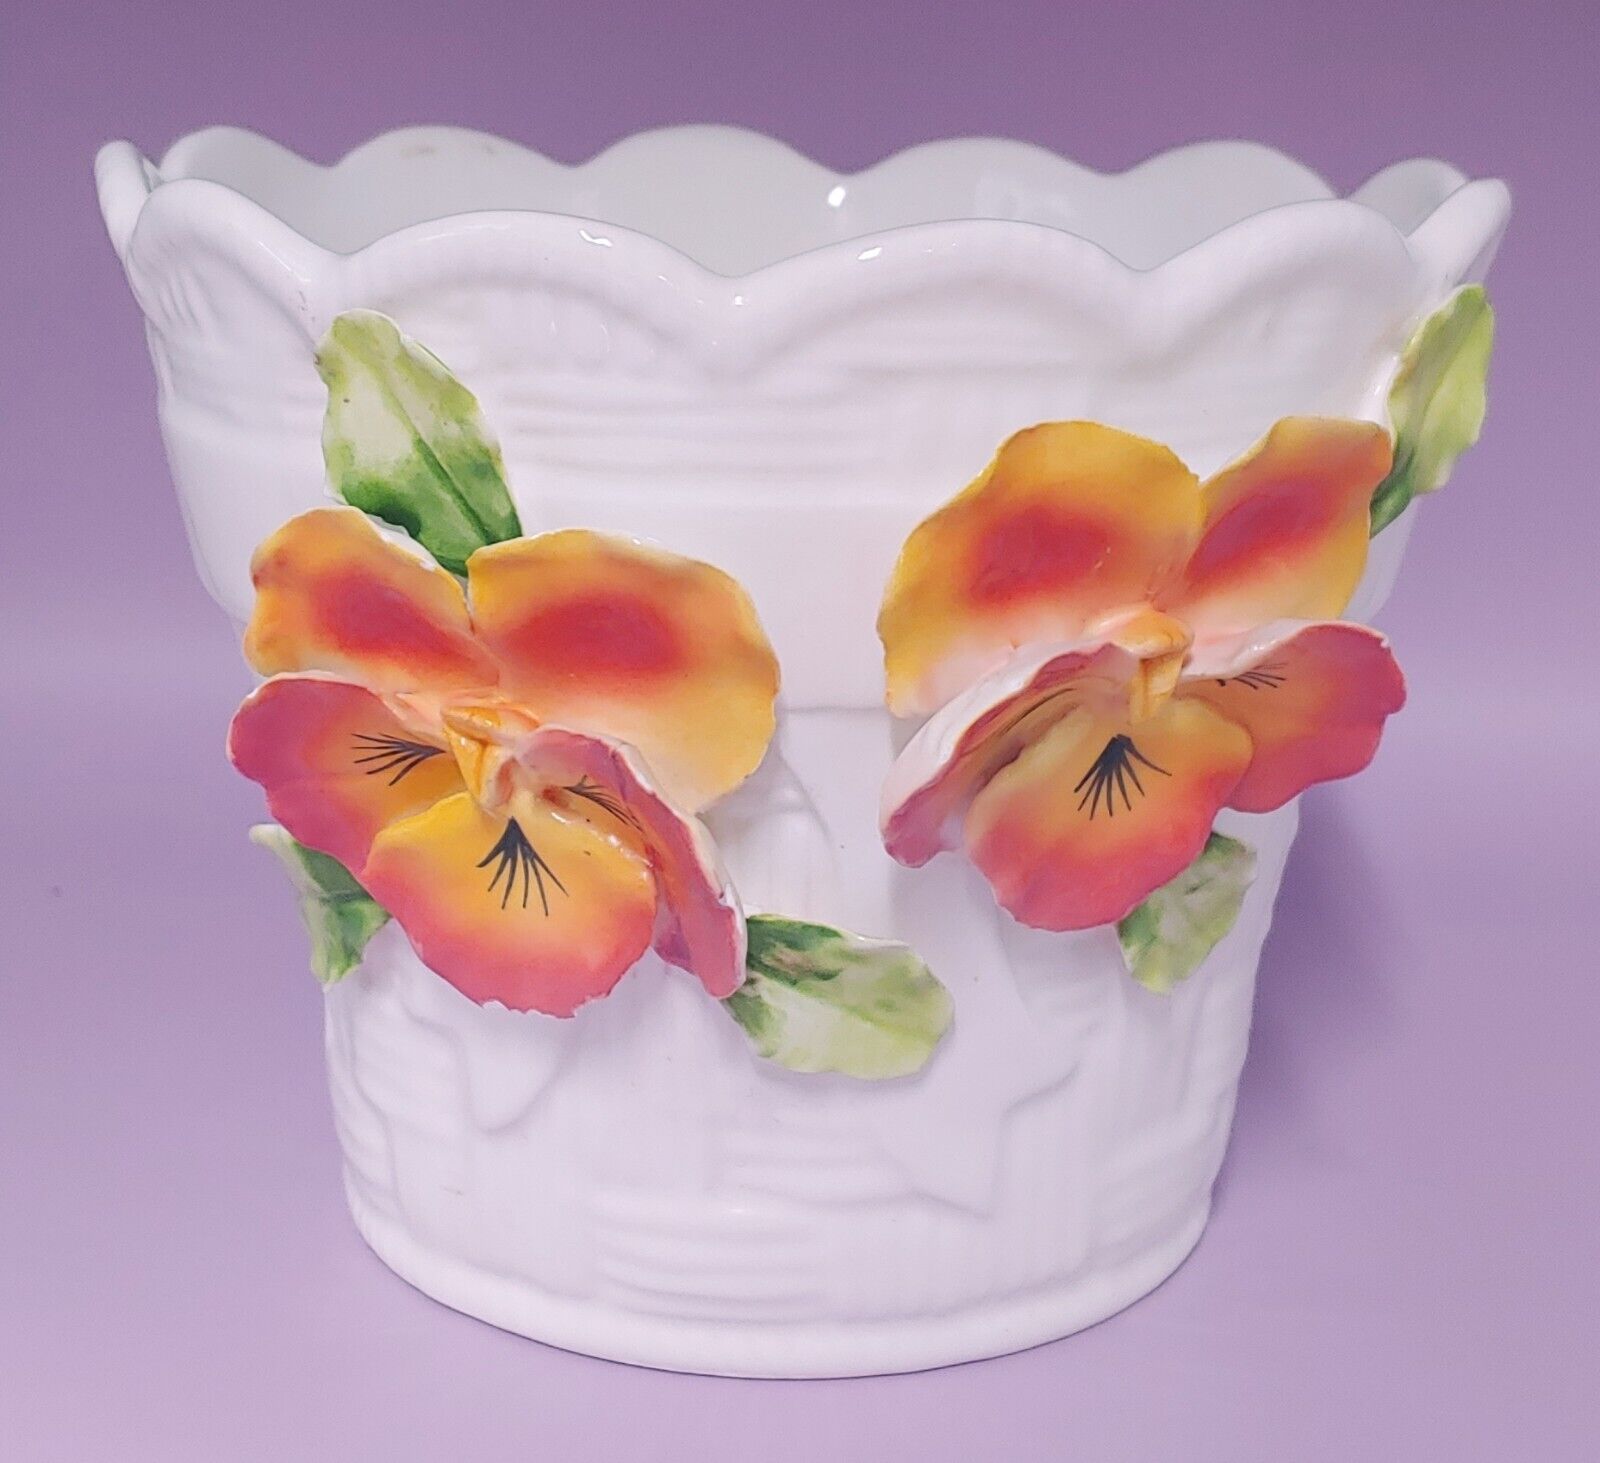 Made In Portugal Jay Willfred Div. Of Andrea Sadek Hand painted ceramic Planter